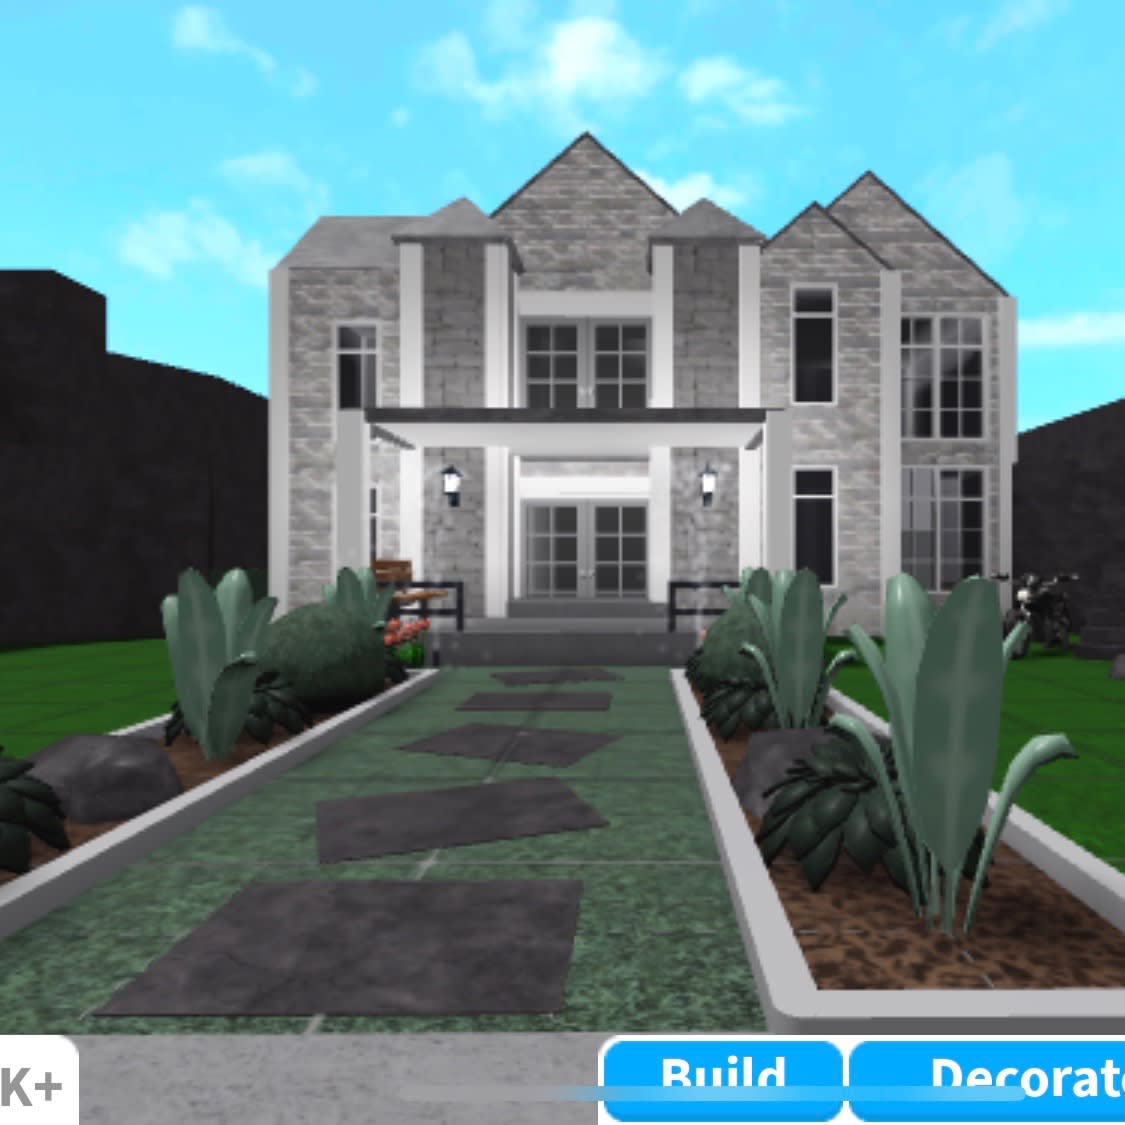 Build You A House On Welcome To Bloxburg Roblox By Marianava668